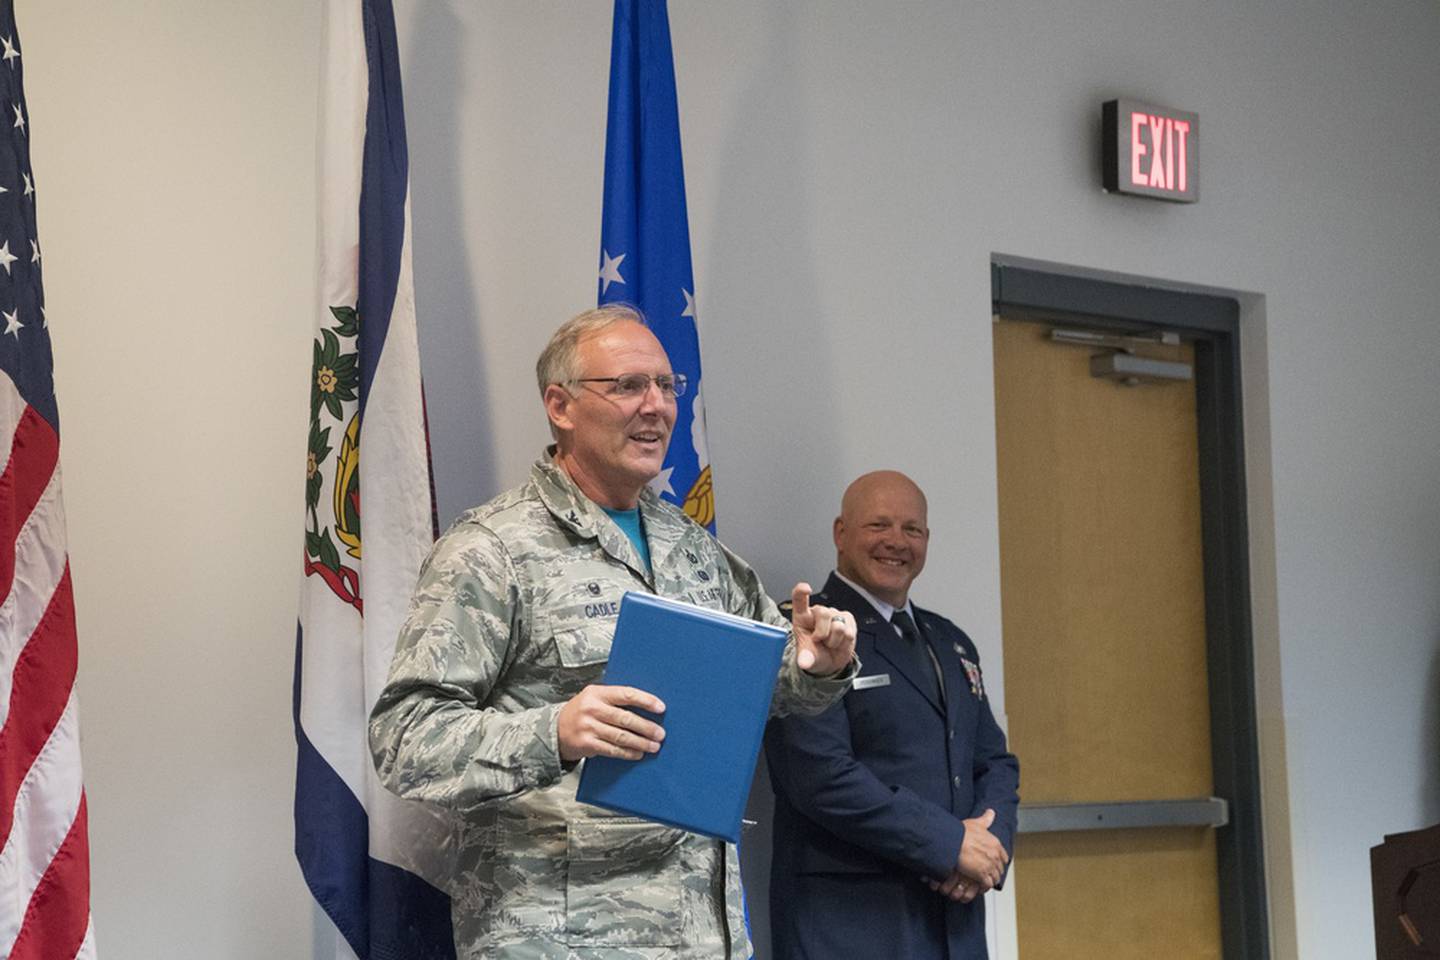 Col. Michael Cadle, then the 130th Airlift Wing Mission Support Group commander, gives remarks during a formal promotion ceremony held May 6, 2017. (Capt. Holli Nelson/Air National Guard)